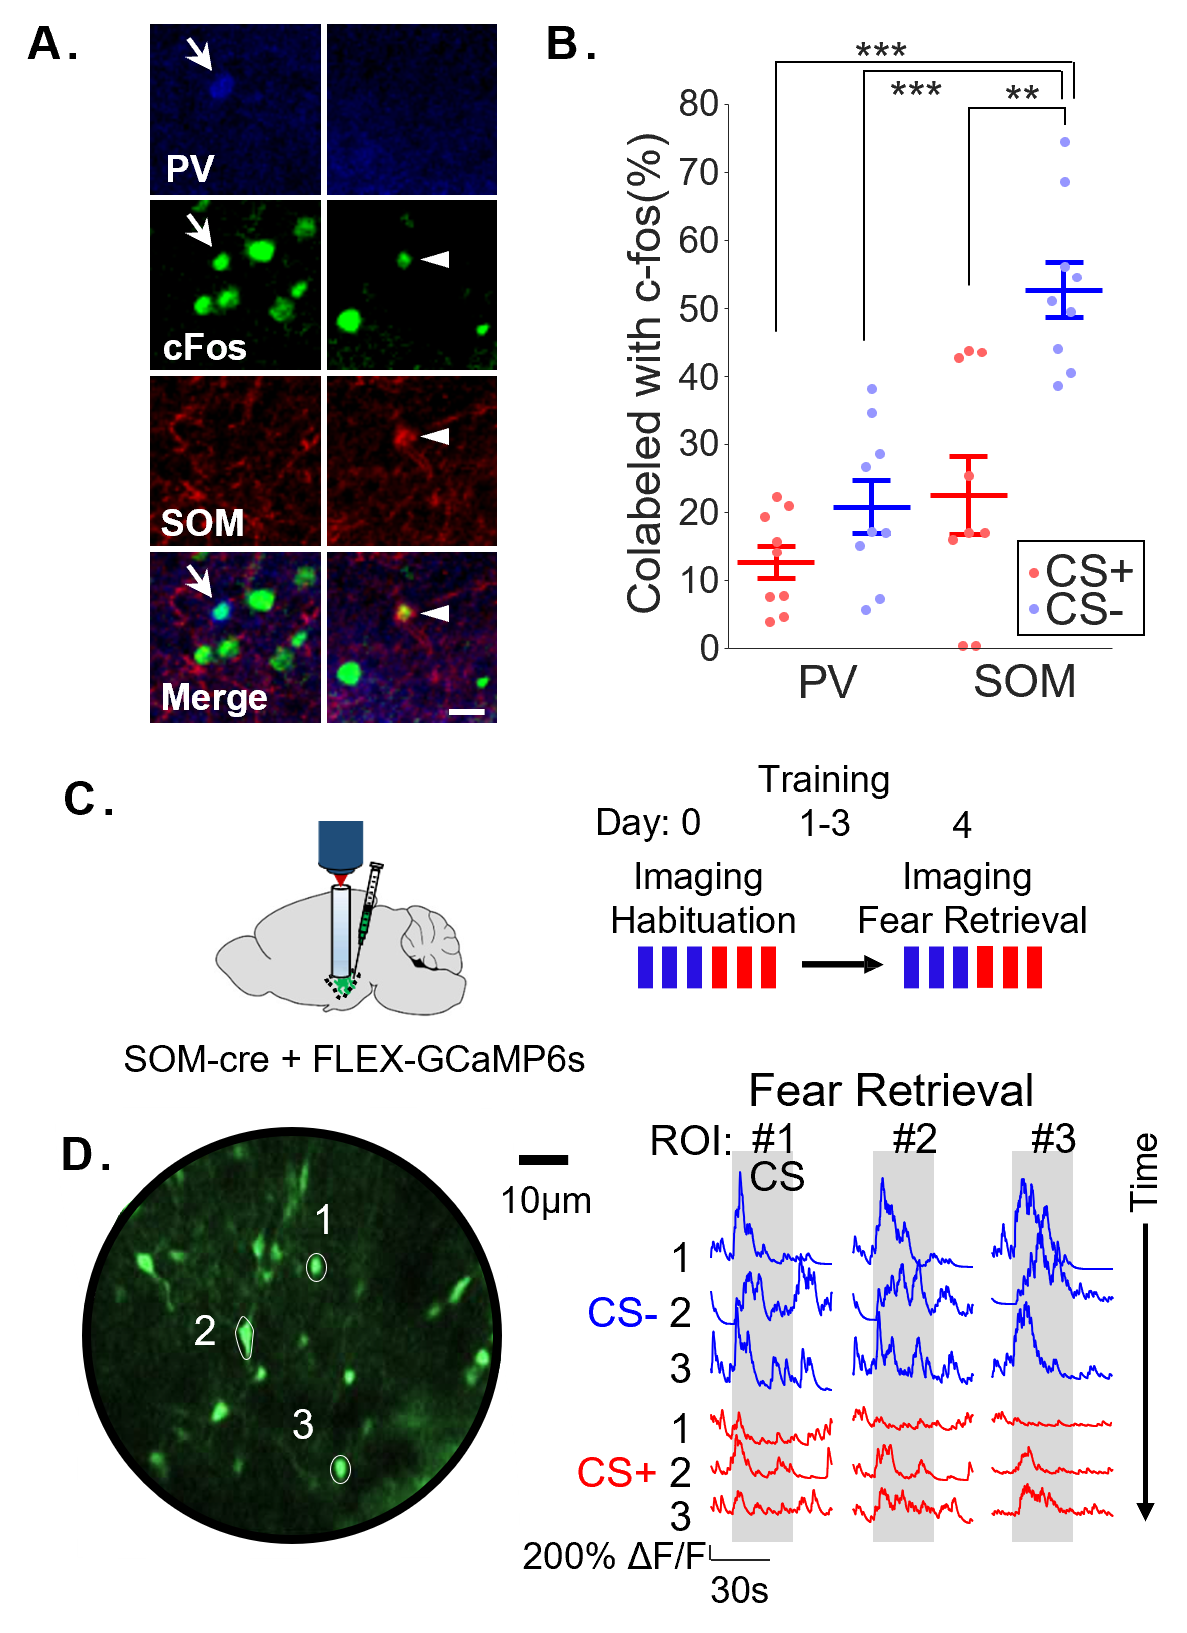 **Figure 2. Somatostatin-positive (SOM) interneurons are strongly activated by learned non-aversive cues.**
For these experiments, mice were aversively conditioned to one tone (CS+), while another (CS-) was explicitly not paired with an outcome.
**A.** cFos, an intermediate early gene, was used as an index of neural activity in the basolateral amygdala. On the day after training, mice were exposed to either the CS+ or CS-. Representative immunohistochemistry demonstrating a parvalbumin-positive interneuron (PV IN; blue) co-labeled with cFos (full arrow, left) and a SOM IN (red) co-labeled with cFos (arrowhead, right). Scale bar, 20 μm.
**B.** Percentage of PV and SOM cells that co-labeled with cFos in the CS+ and CS- groups. SOM IN show increased activity during CS- retrieval.
**C.** Calcium activity of SOM IN was imaged during habituation to the tones and during fear retrieval on Day 4.
**D.** Left, example maximum projection image from an animal expressing GCaMP6s in BLA SOM IN. Three ROIs are shown in white contours. Right, the CS- and CS+-evoked responses in the ROIs demonstrate that SOM cells reliably respond to the CS- and inconsistently respond to the CS+. Note that tone number advances as you progress down the figure.